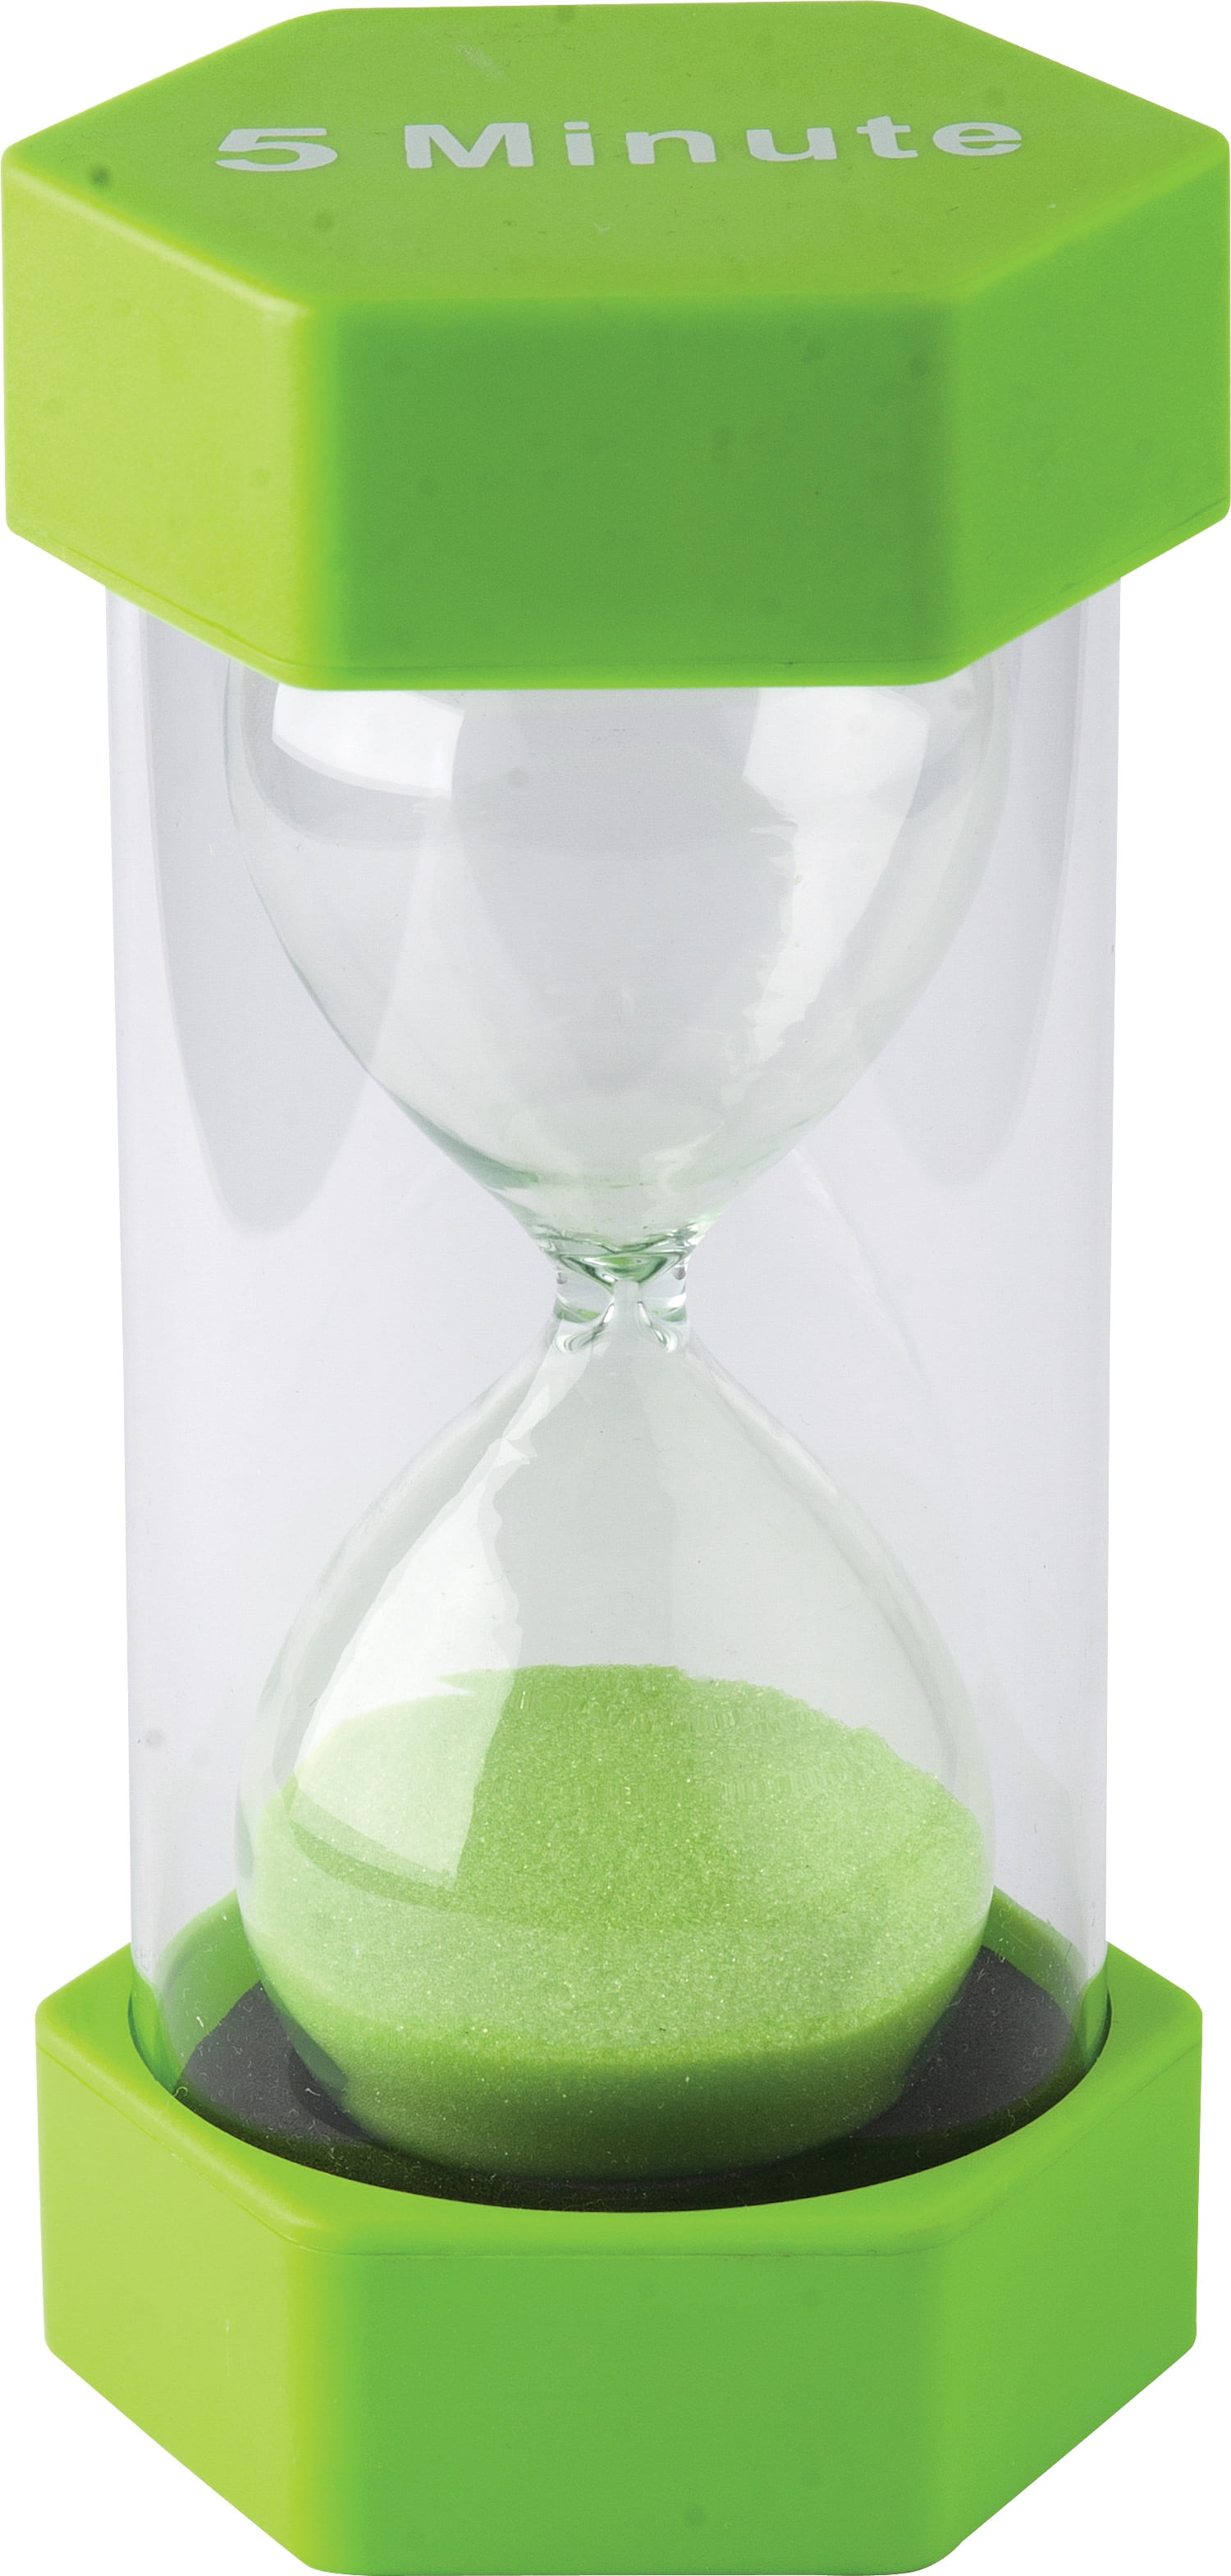 Autism Sensory Sand Timer 15 min Educational Toy by Playlearn Hourglass. 